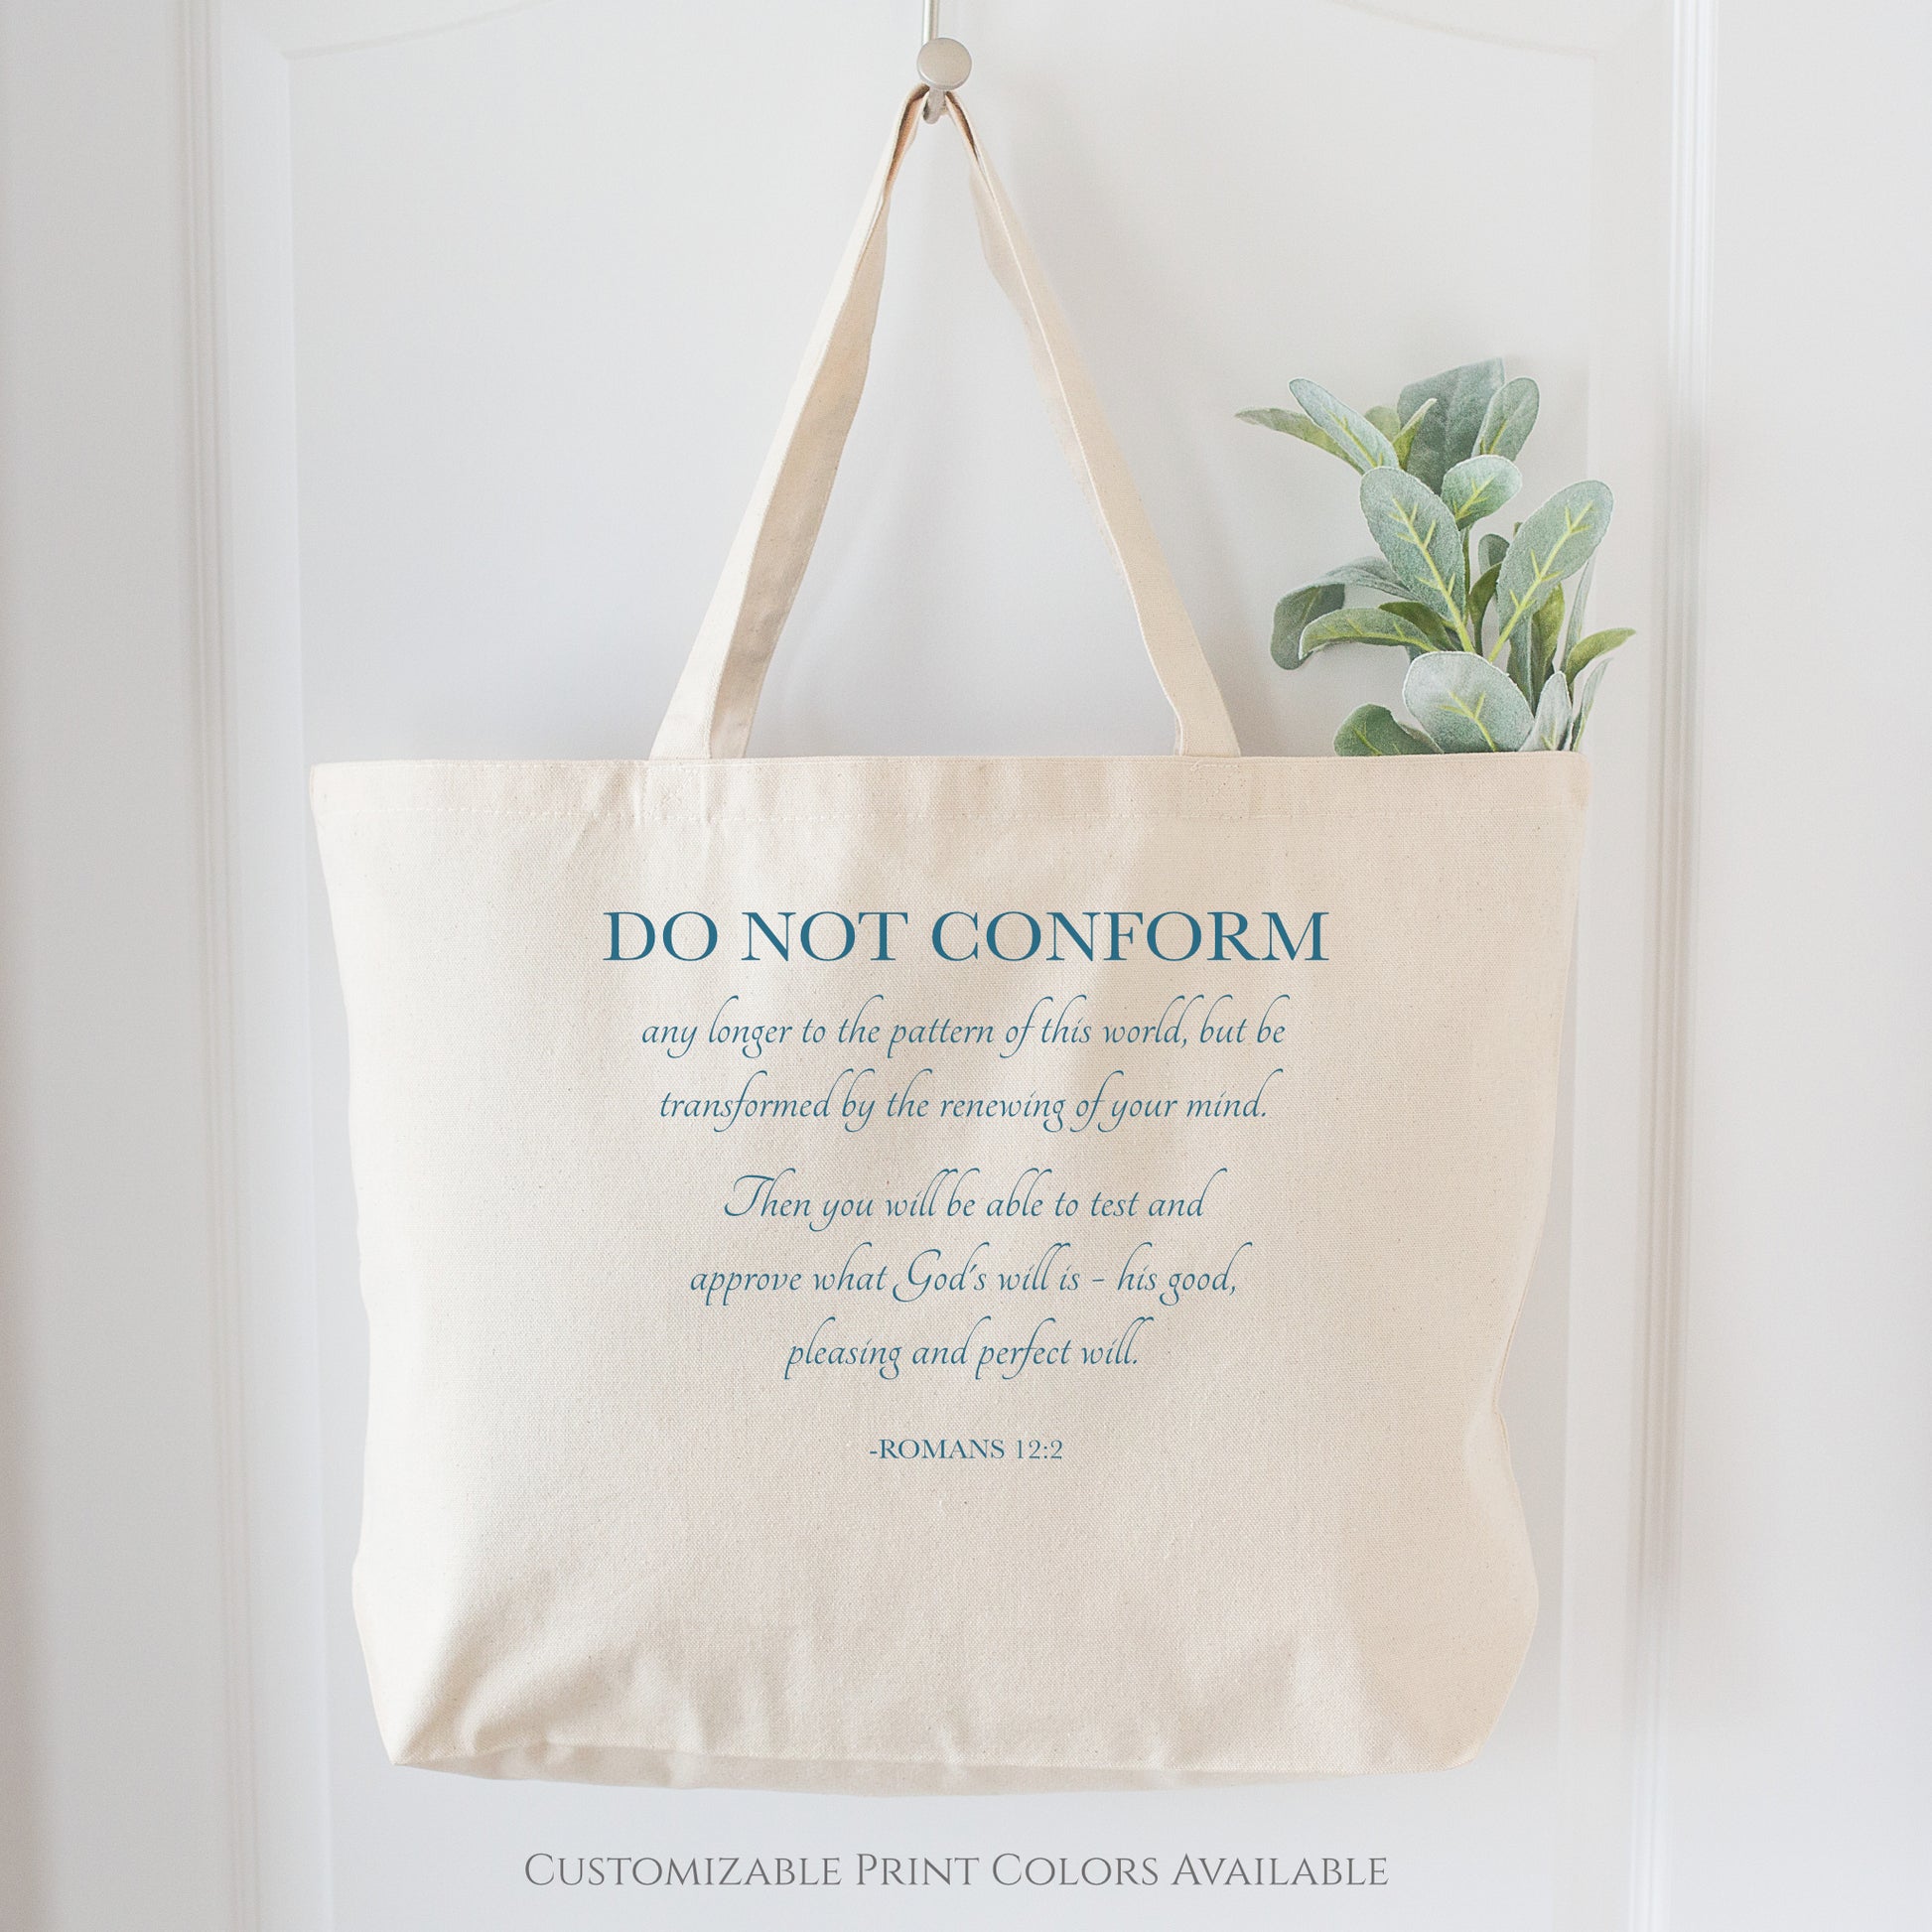 Do not conform any longer to the pattern of this world, but be transformed by the reviewing of your mind. Then you will be able to test and approve what God's will is - his goo, pleasing and perfect will. - Romans 12:2, Canvas Tote Bag